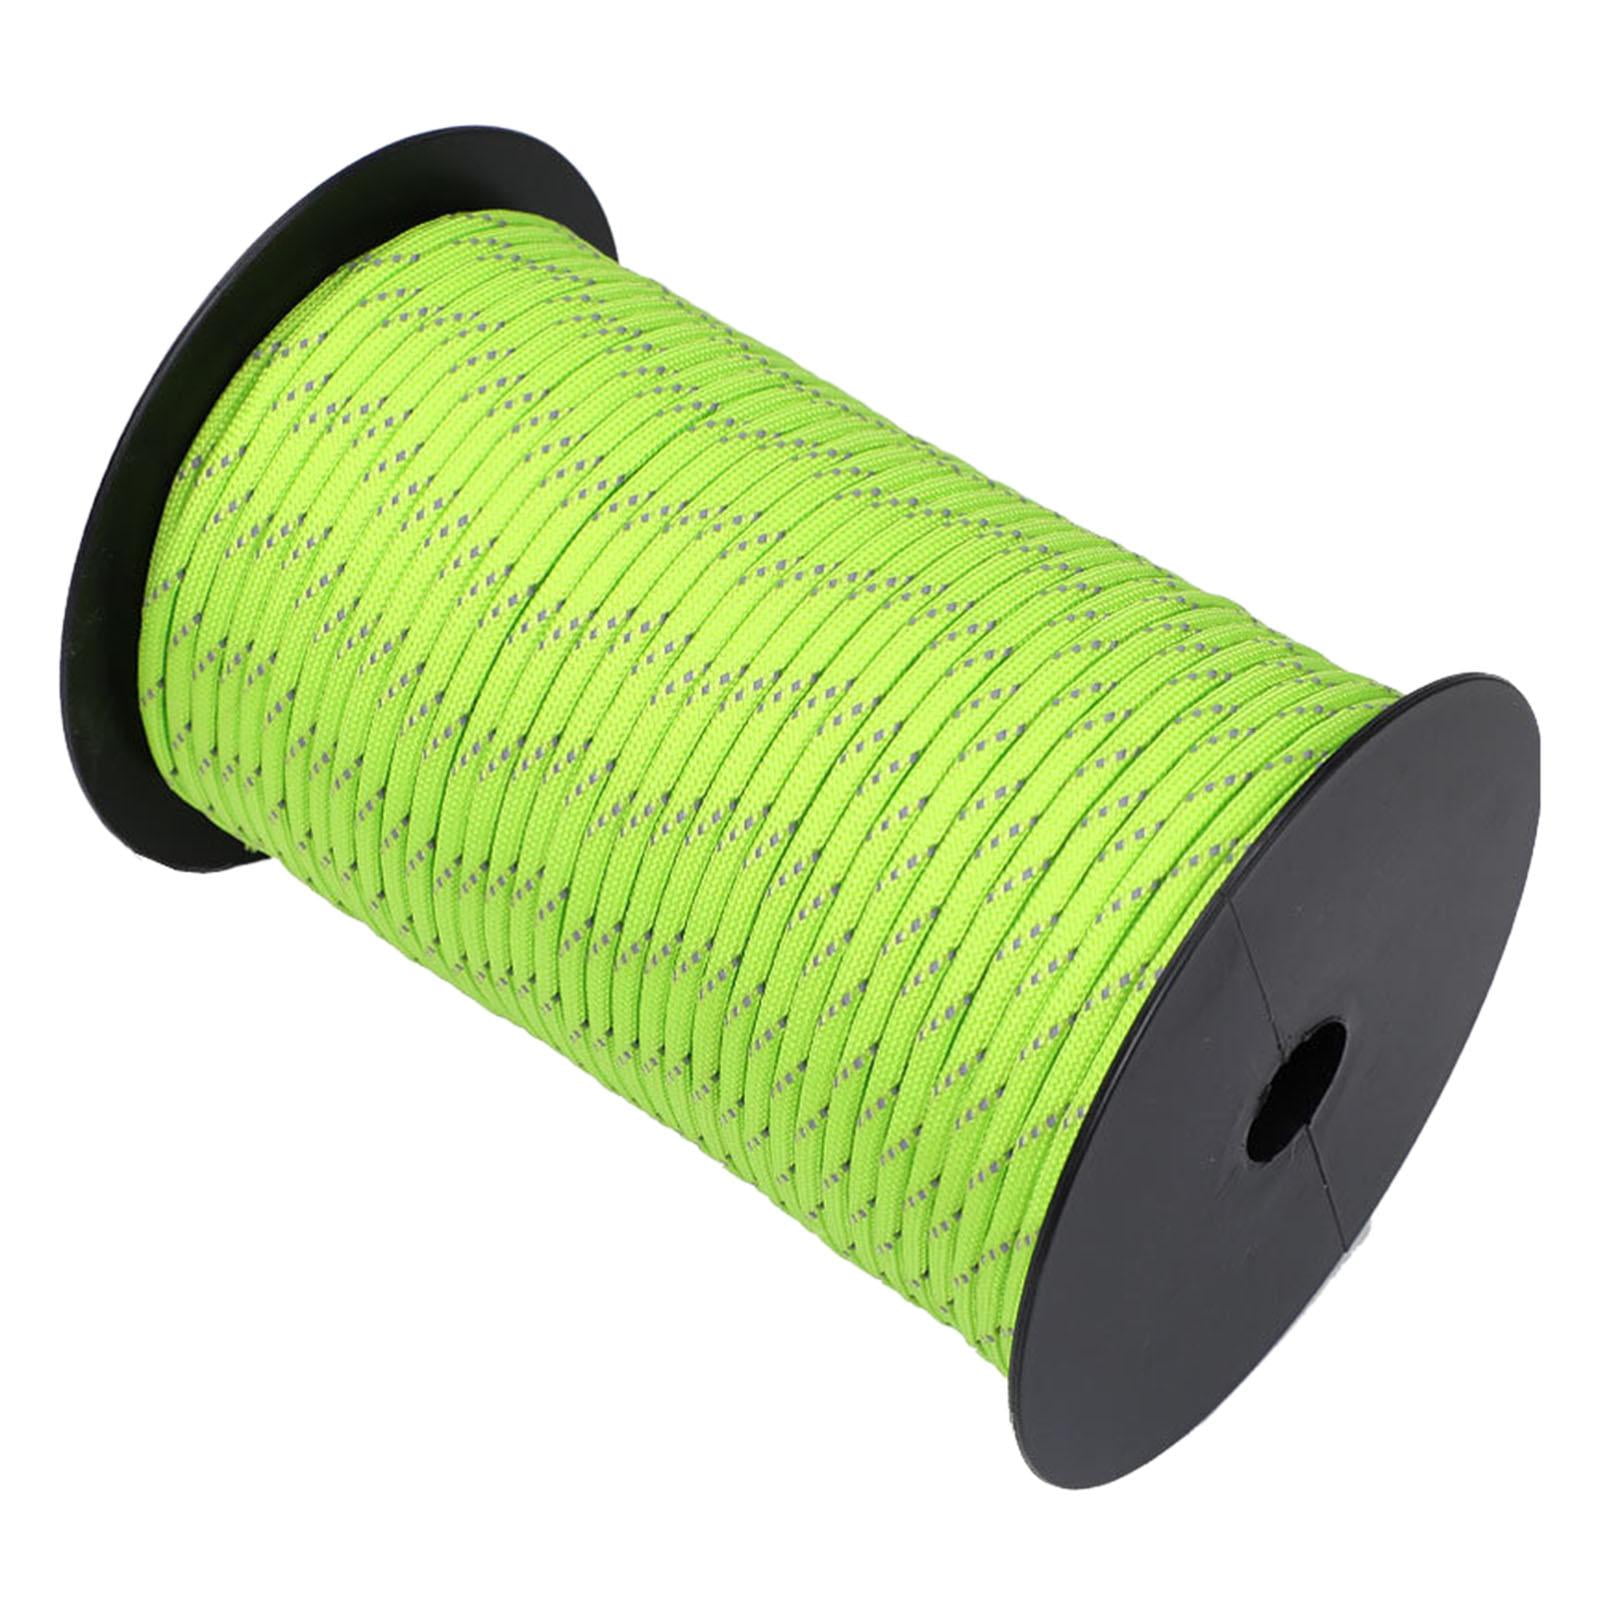 Reflective String Tent Rope CordGuyline Camping Rescue Survival Gadget Green 